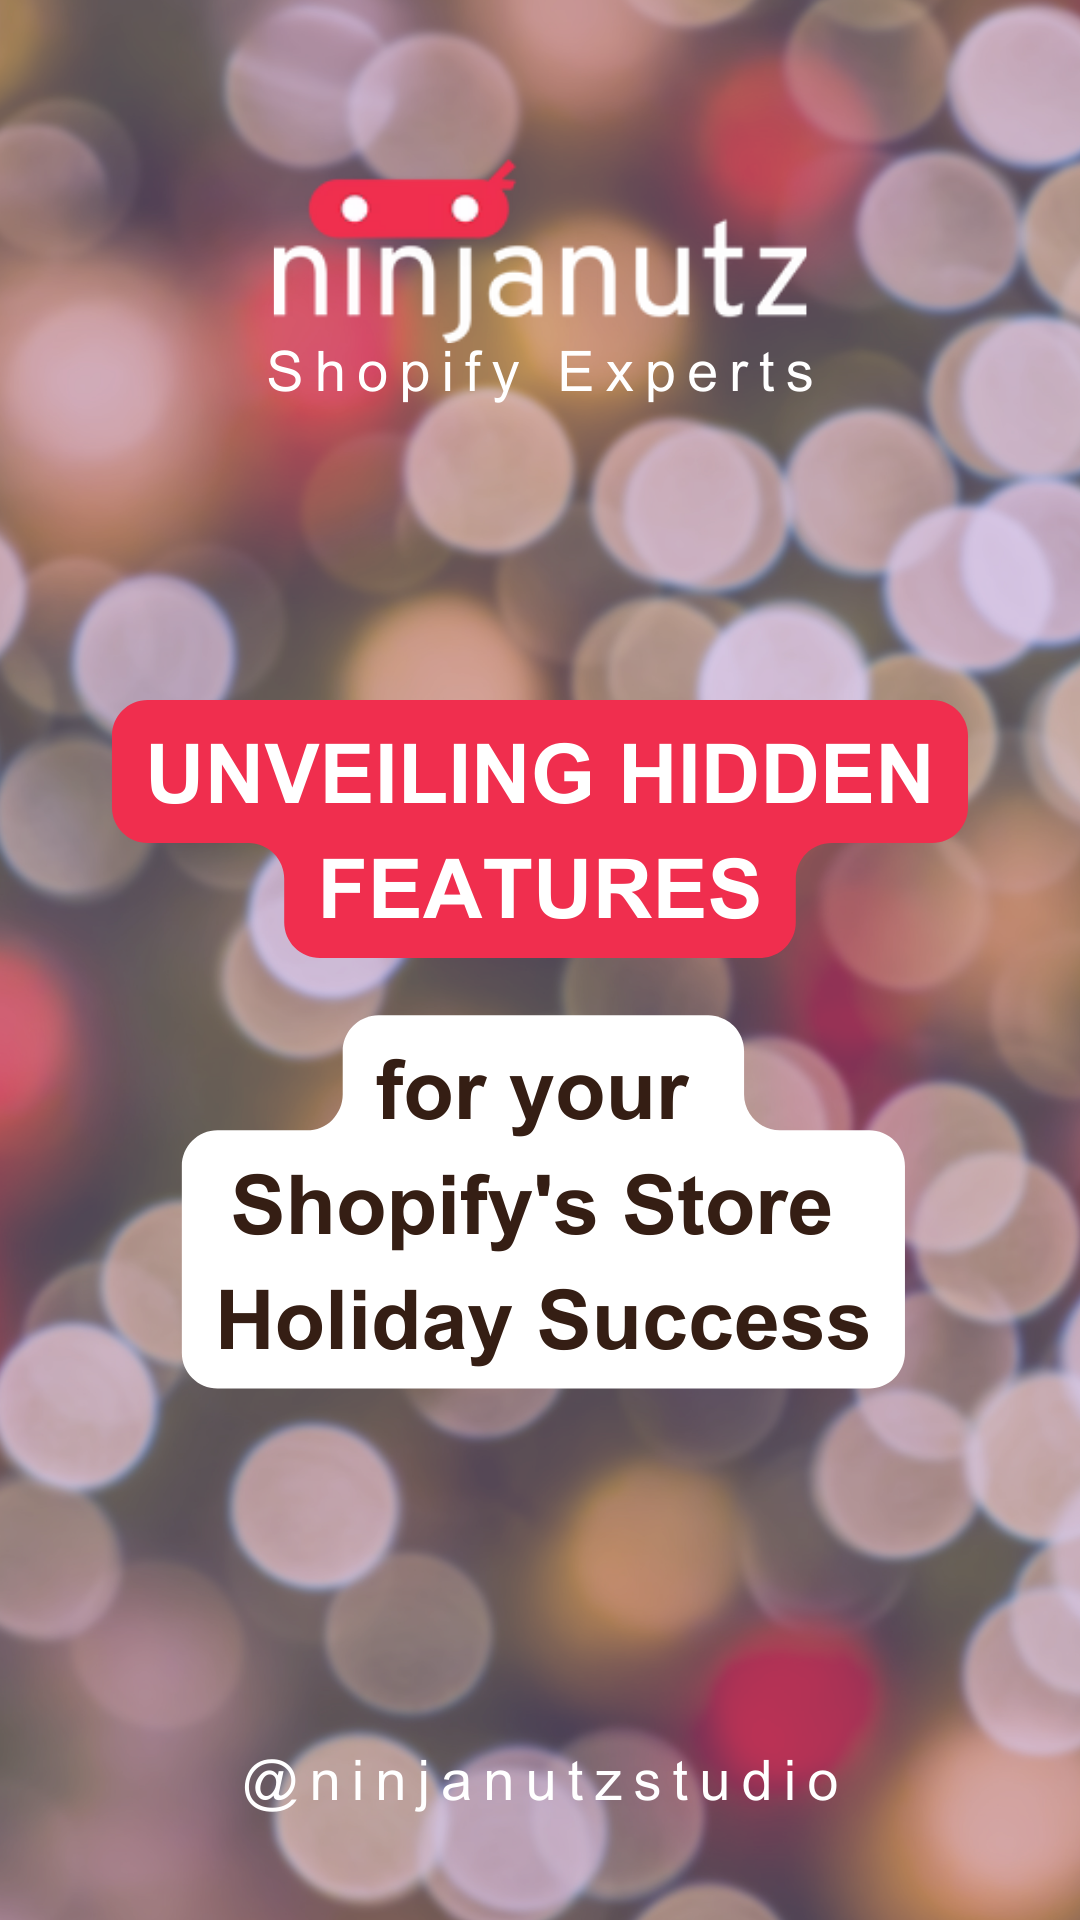 Unveiling Hidden Features for your Shopify's Store Holiday Success